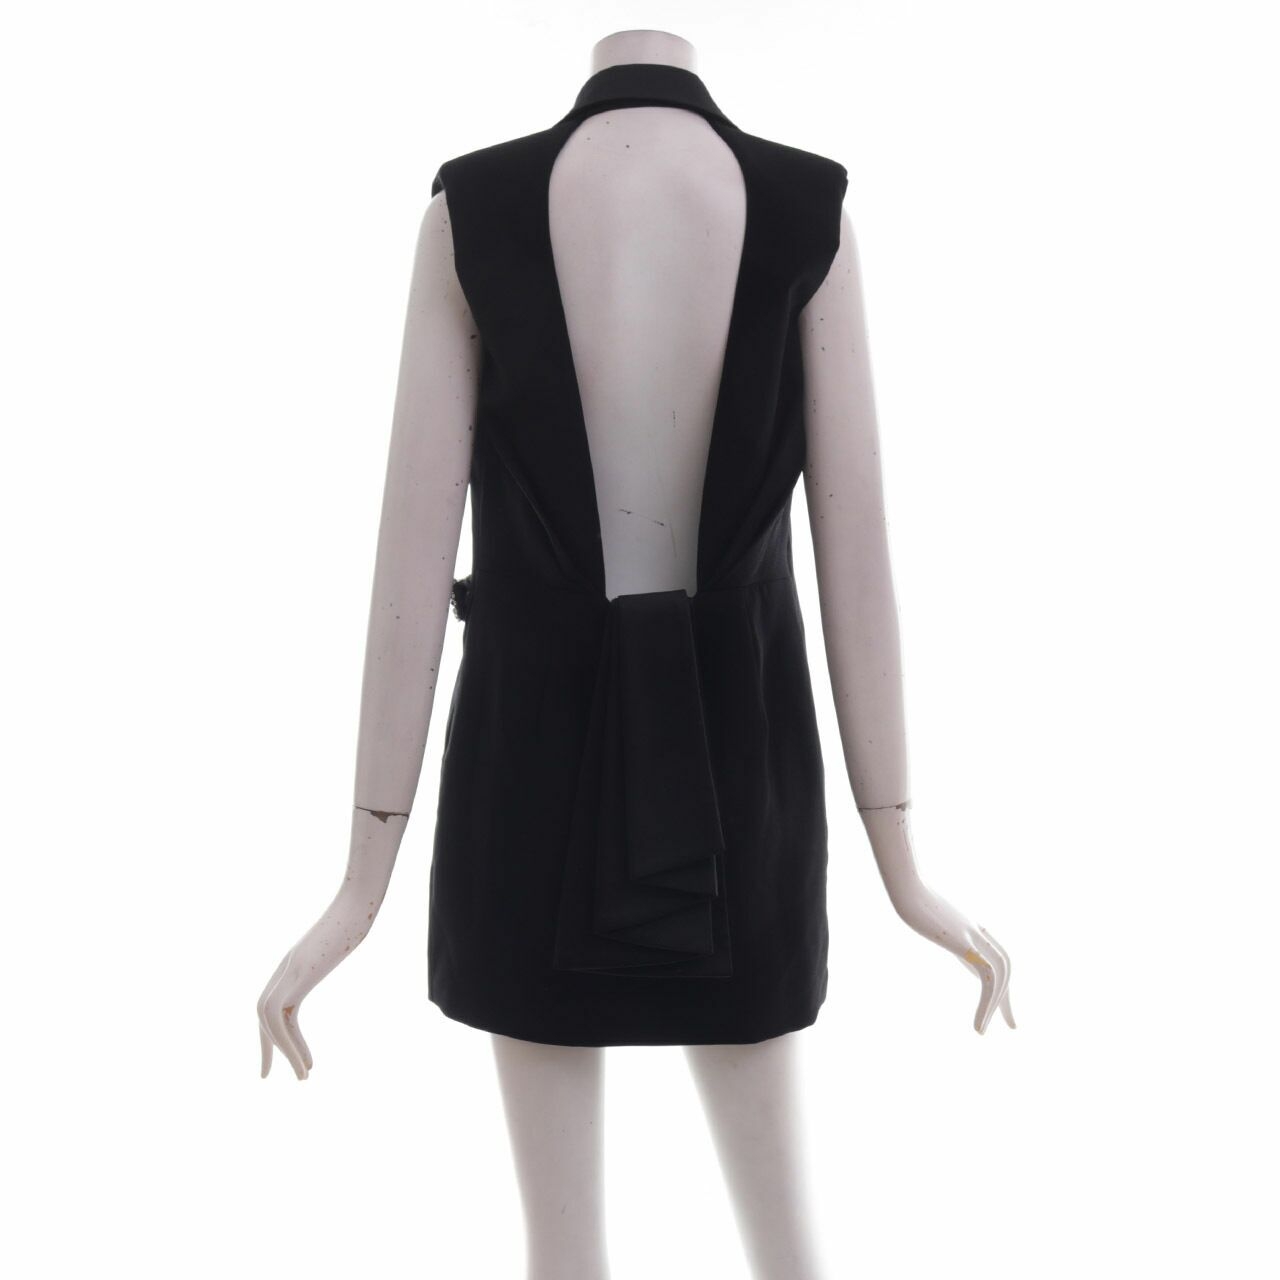 Thea by Thara Black Backless Vest